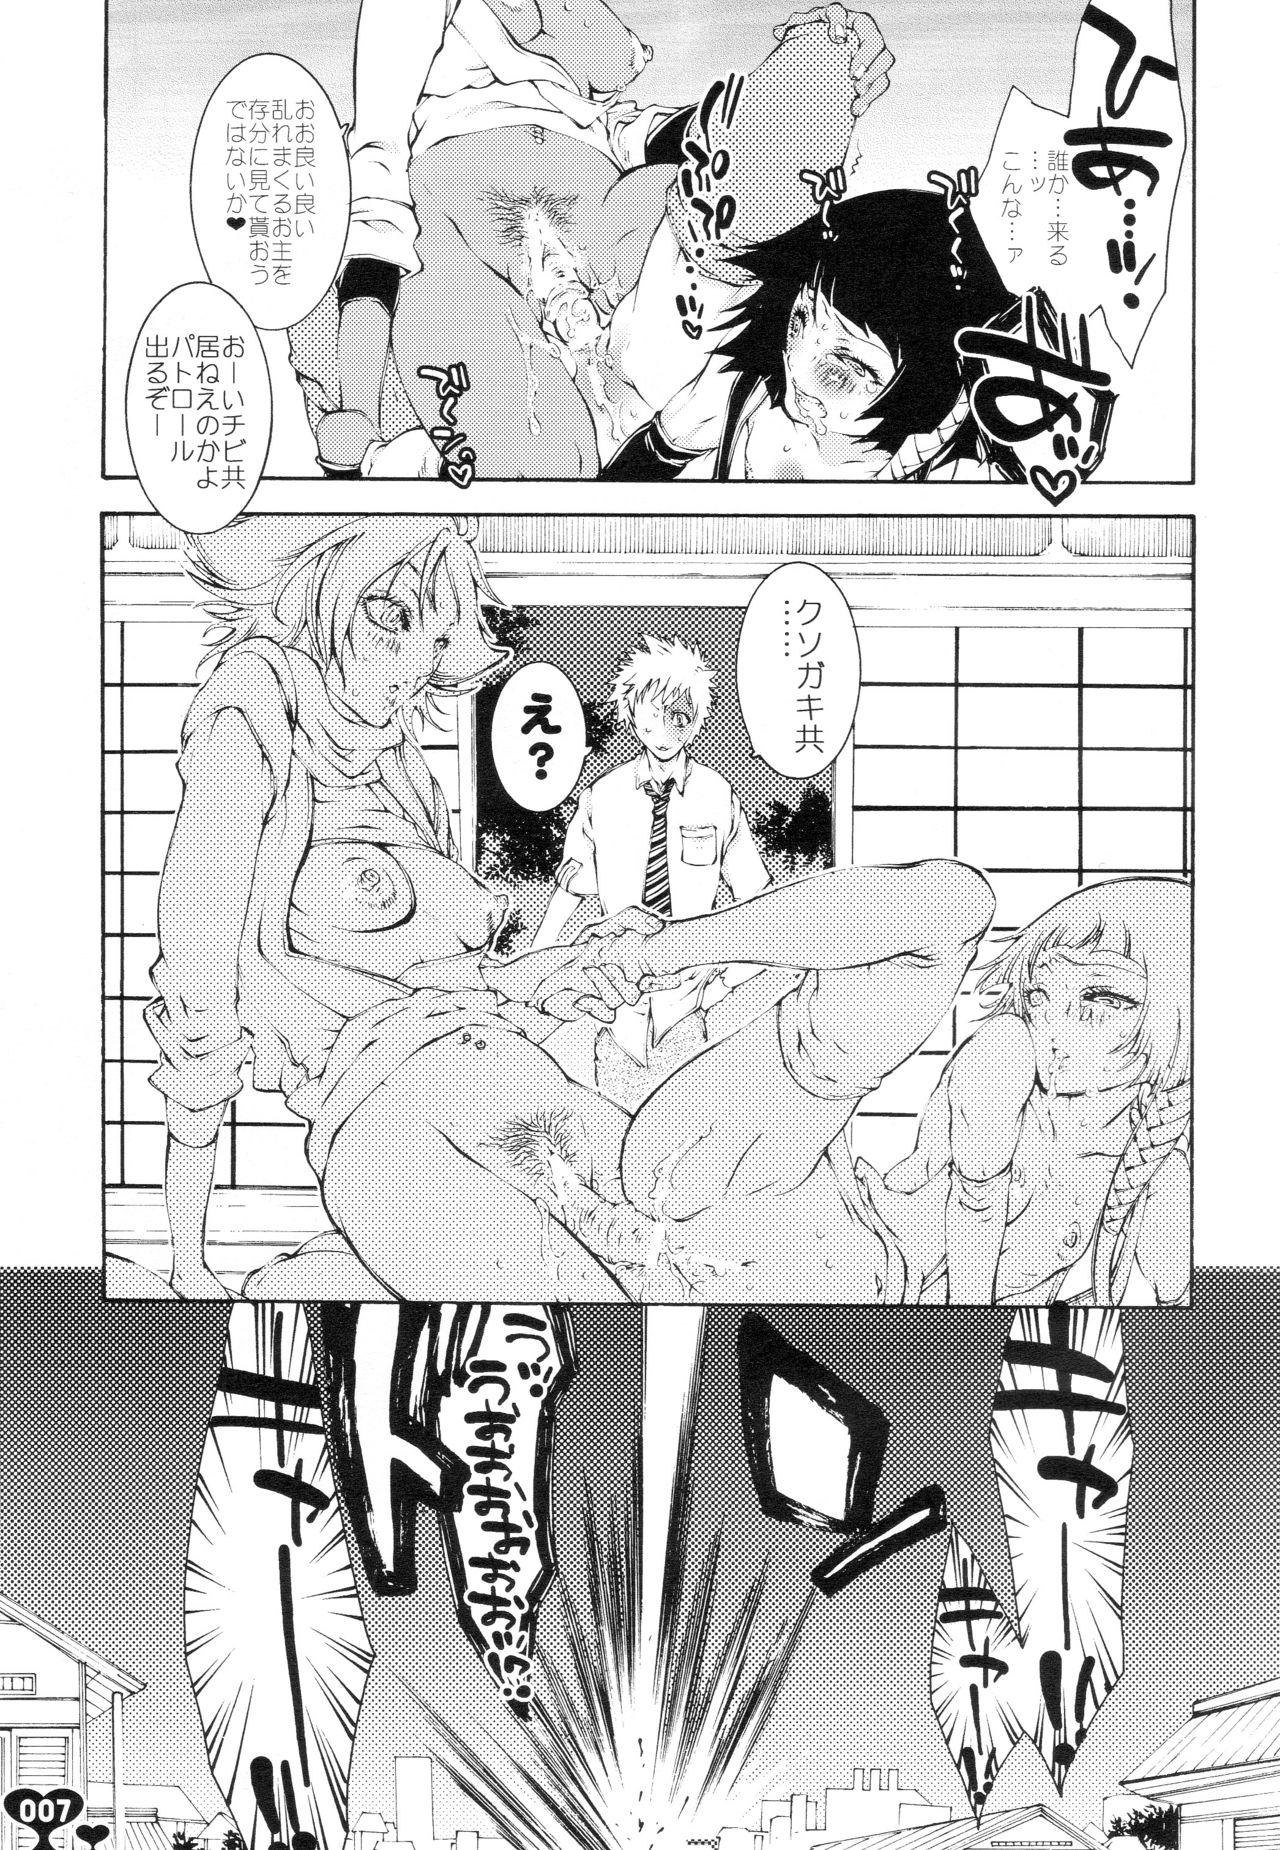 Internal Heavy Syrup Dellinger - Bleach Women Sucking Dick - Page 6